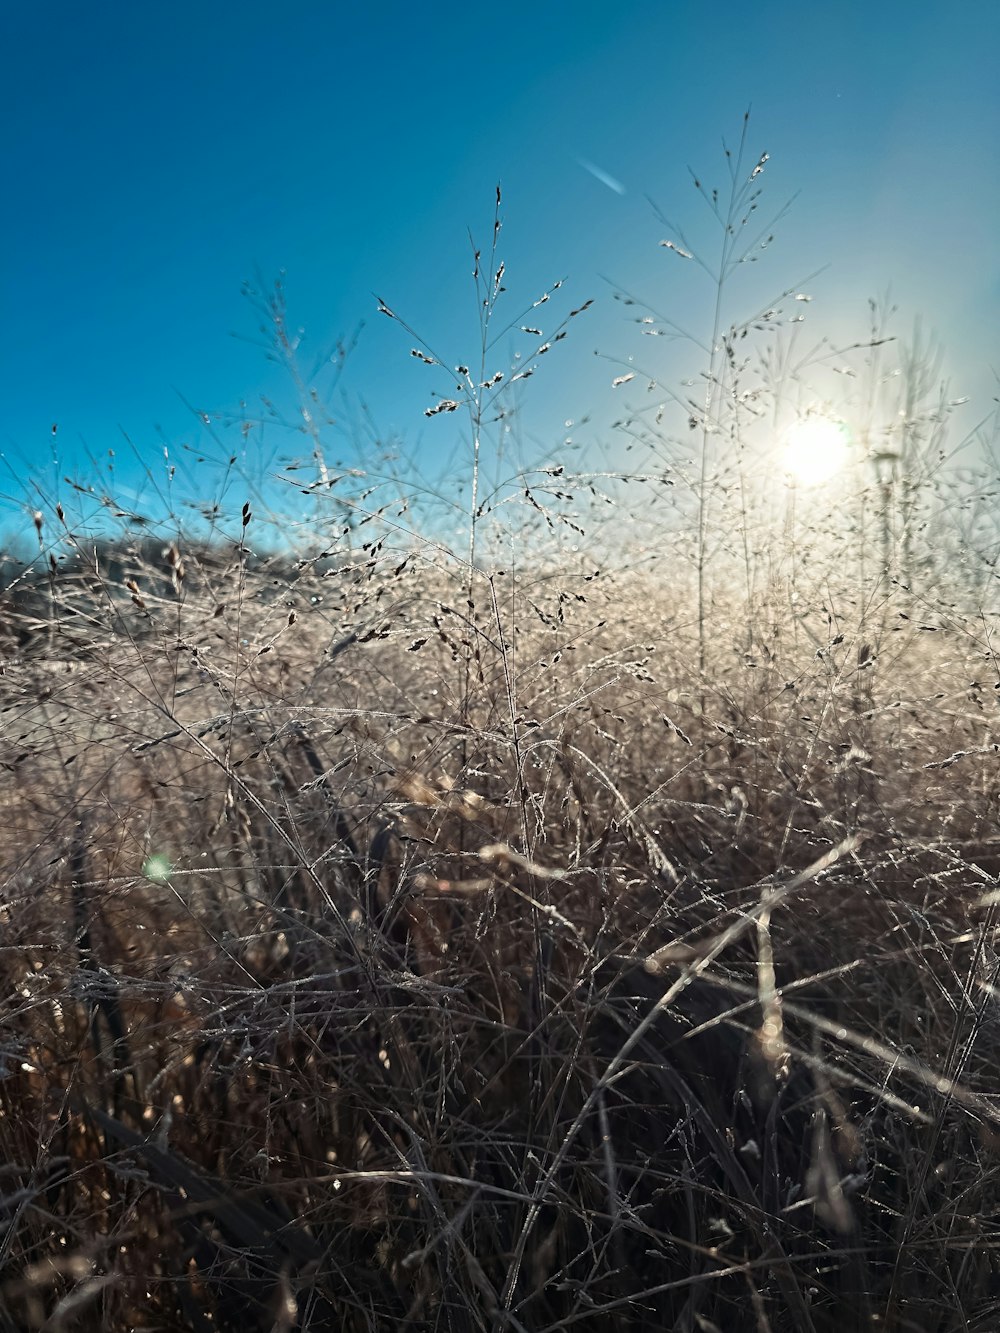 the sun shines brightly through the frosty grass